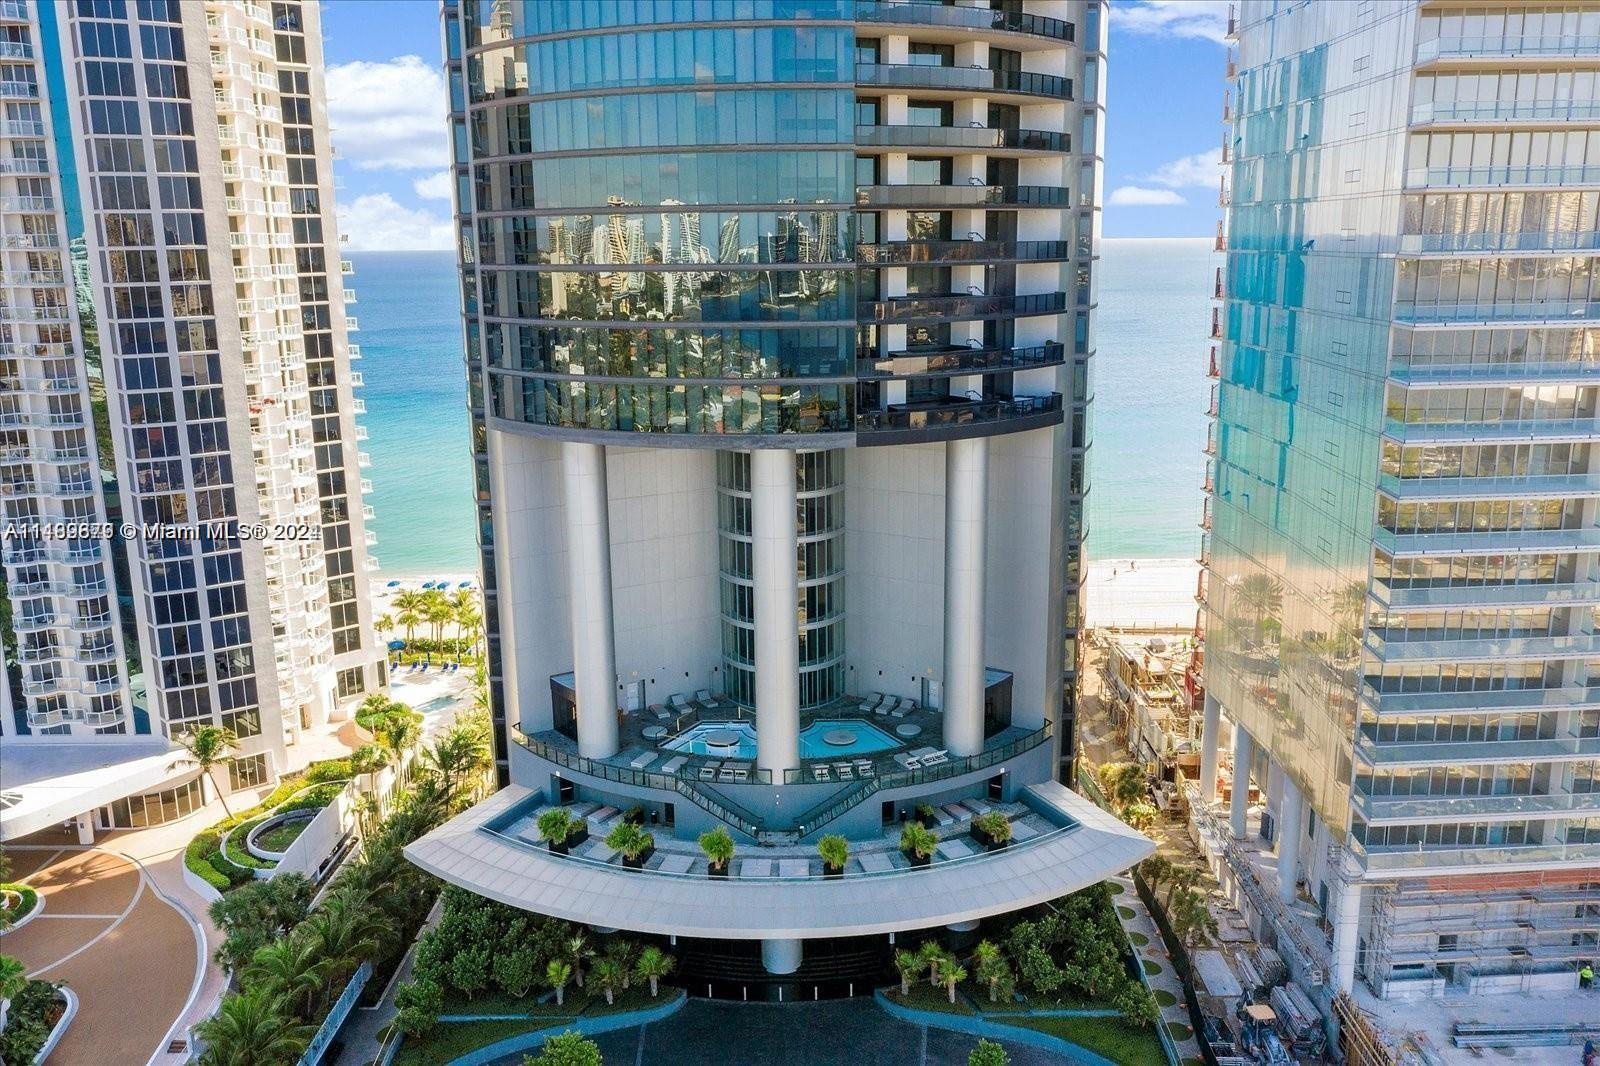 *** Huge price reduction*** presents an opportunity, due to move to another continent, seller is willing and ready to sell!!!!  Two story oceanfront condo at Porsche Design Tower! 3 bed /4.5 bath Home-in-the-Sky with 2-car Sky Garage With Private Car Elevator so you can safely get into your 50th floor home in complete privacy. Dramatic 21 ft ceilings, gorgeous south west views, extensive living area & a grand terrace complete the package. Porsche Design amenities include racing car & golf simulators, full-service restaurant, bar, room service, spa, sunrise and sunset pools & 200 ft on the ocean with beach service.